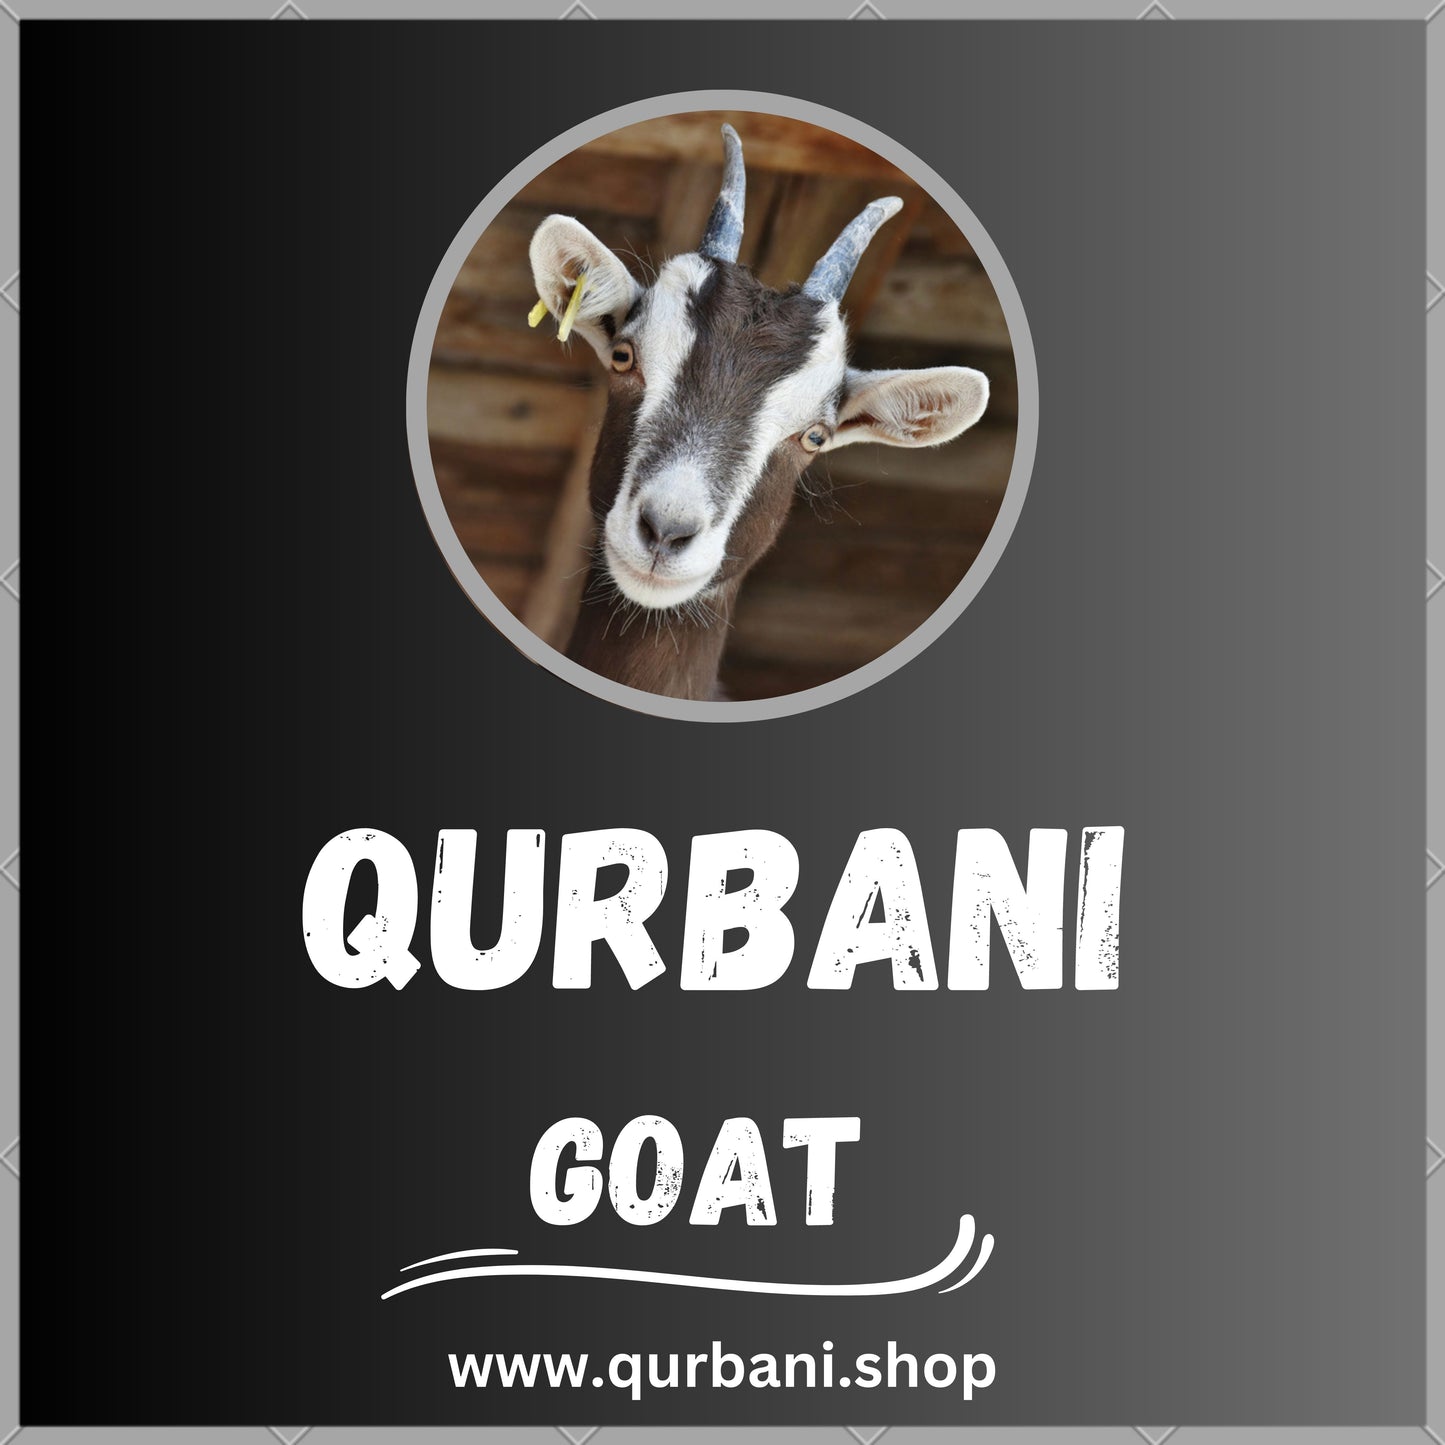 Ethical Qurbani in Fort Lauderdale: Share Blessings this Eid